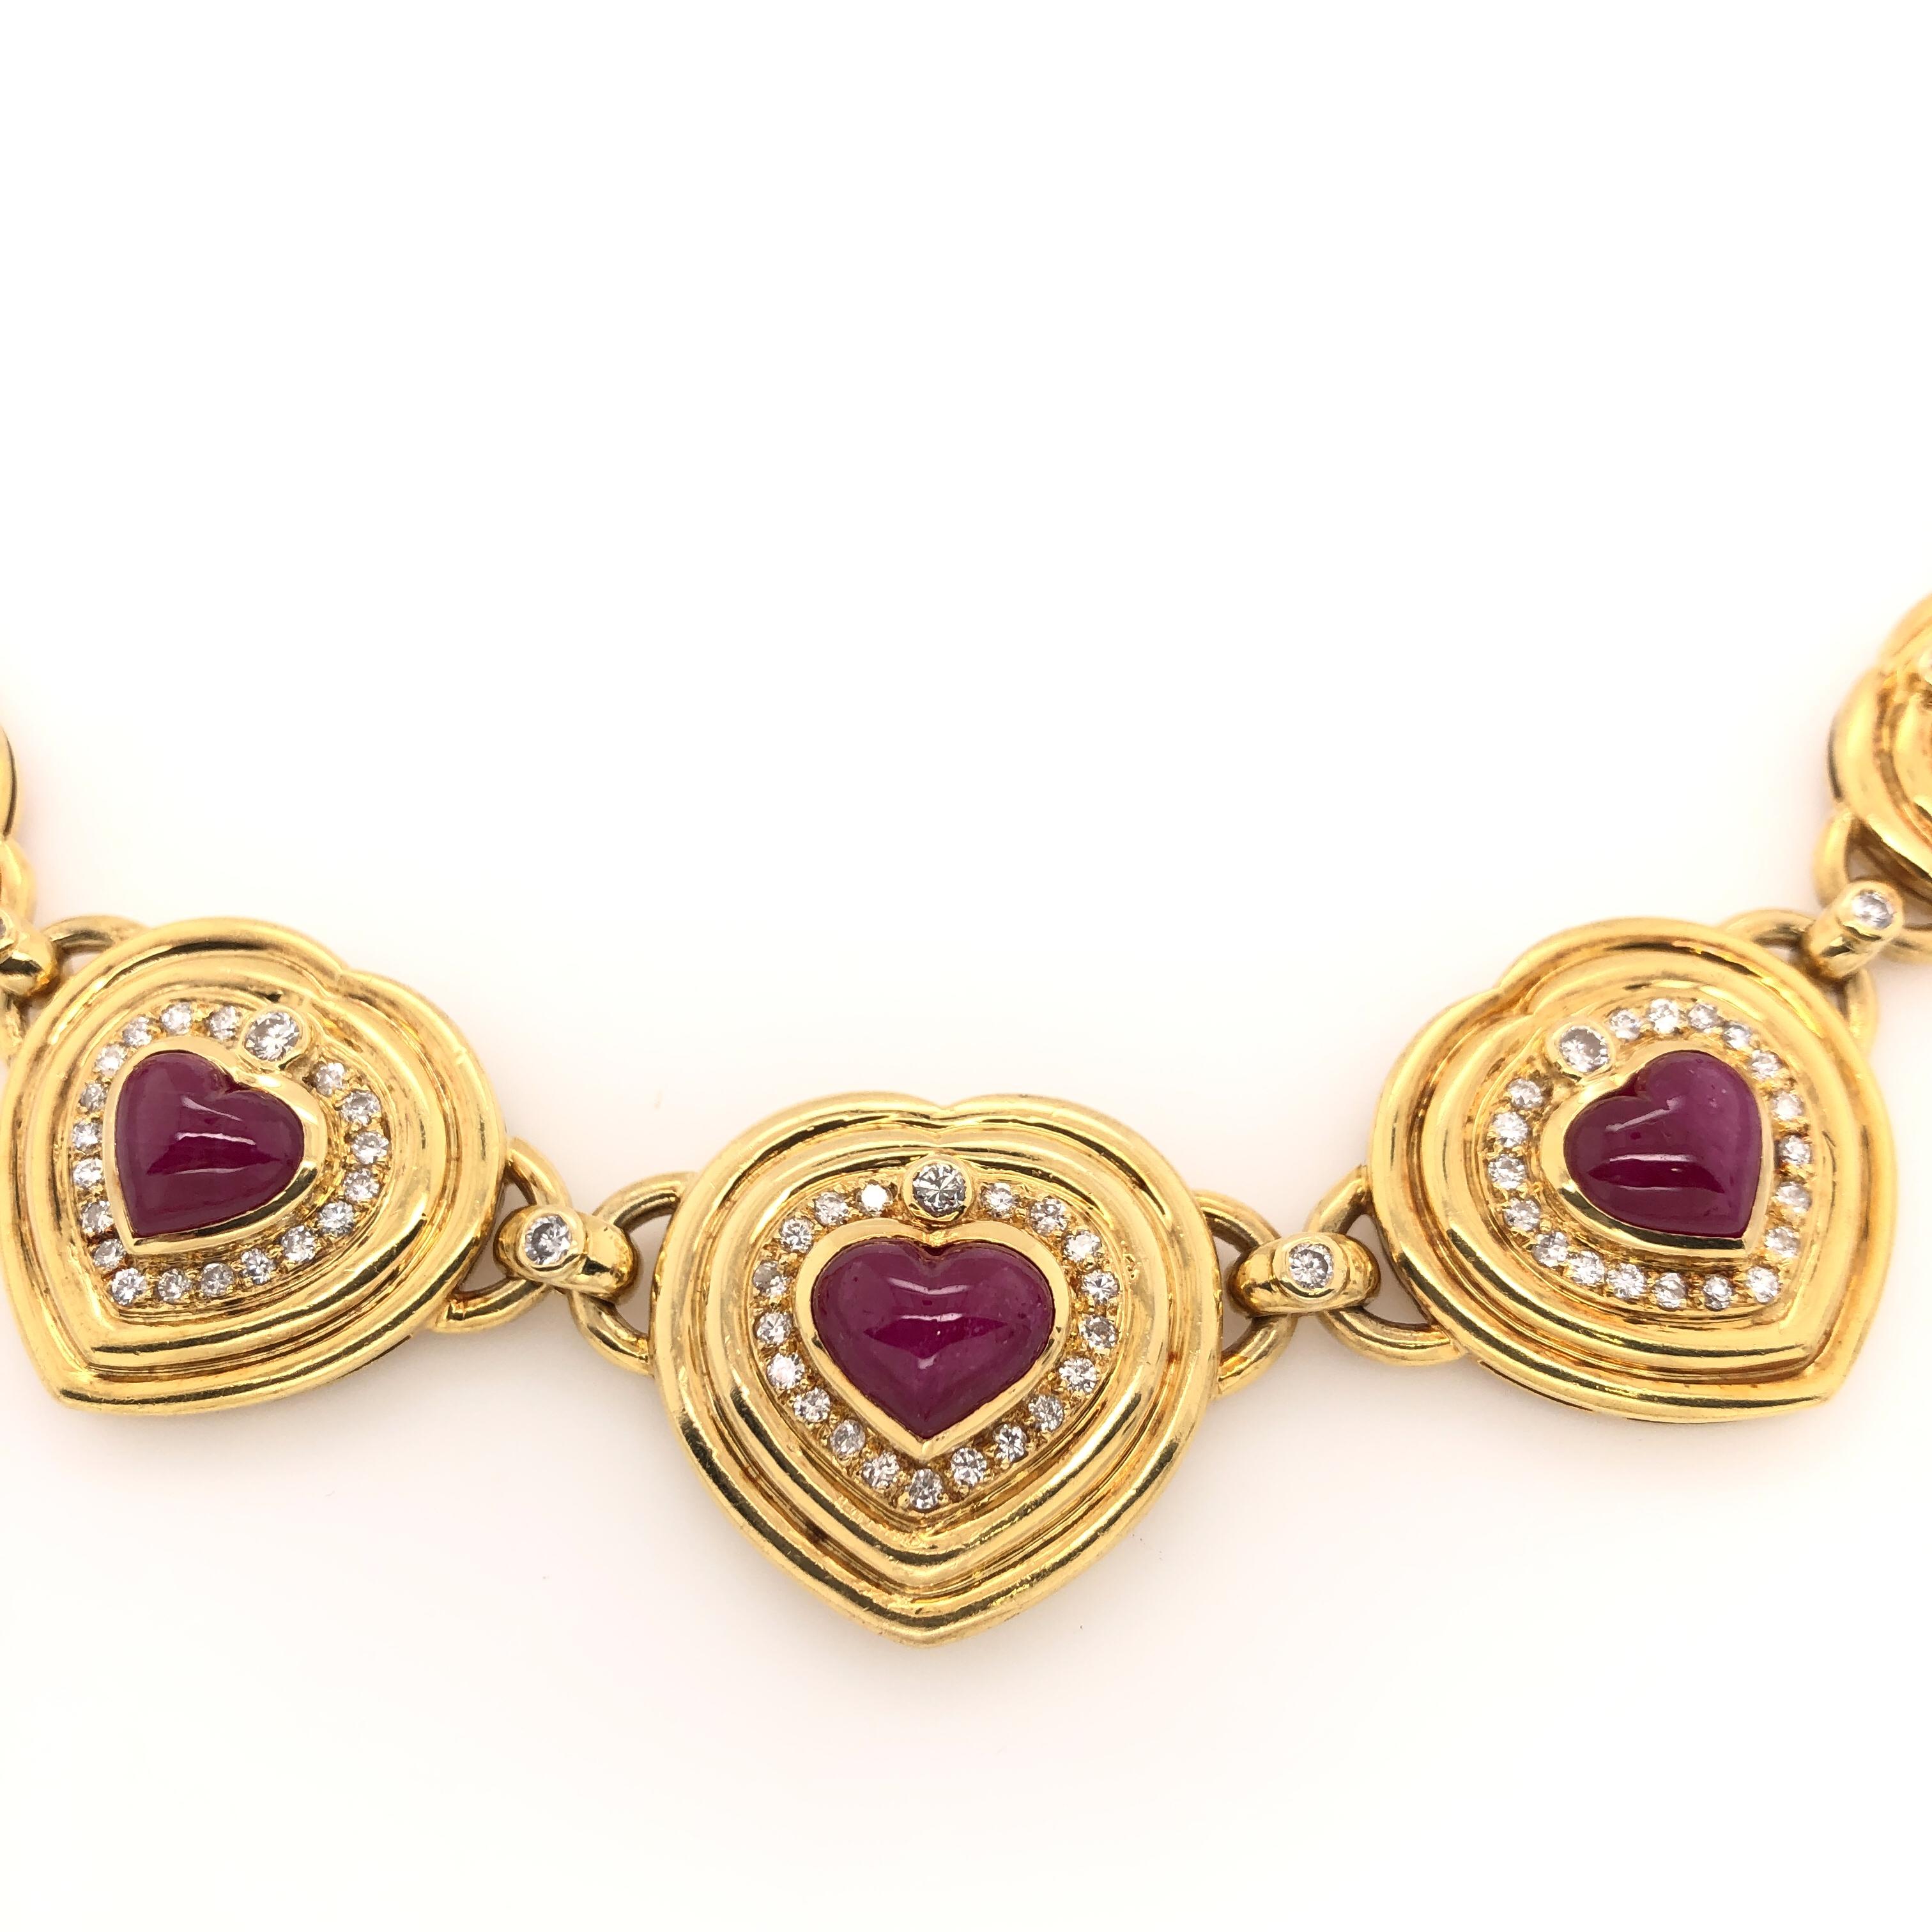 Seven Hearts Shaped Ruby and Diamond Necklace 18k Yellow Gold Panther Link Chain For Sale 1